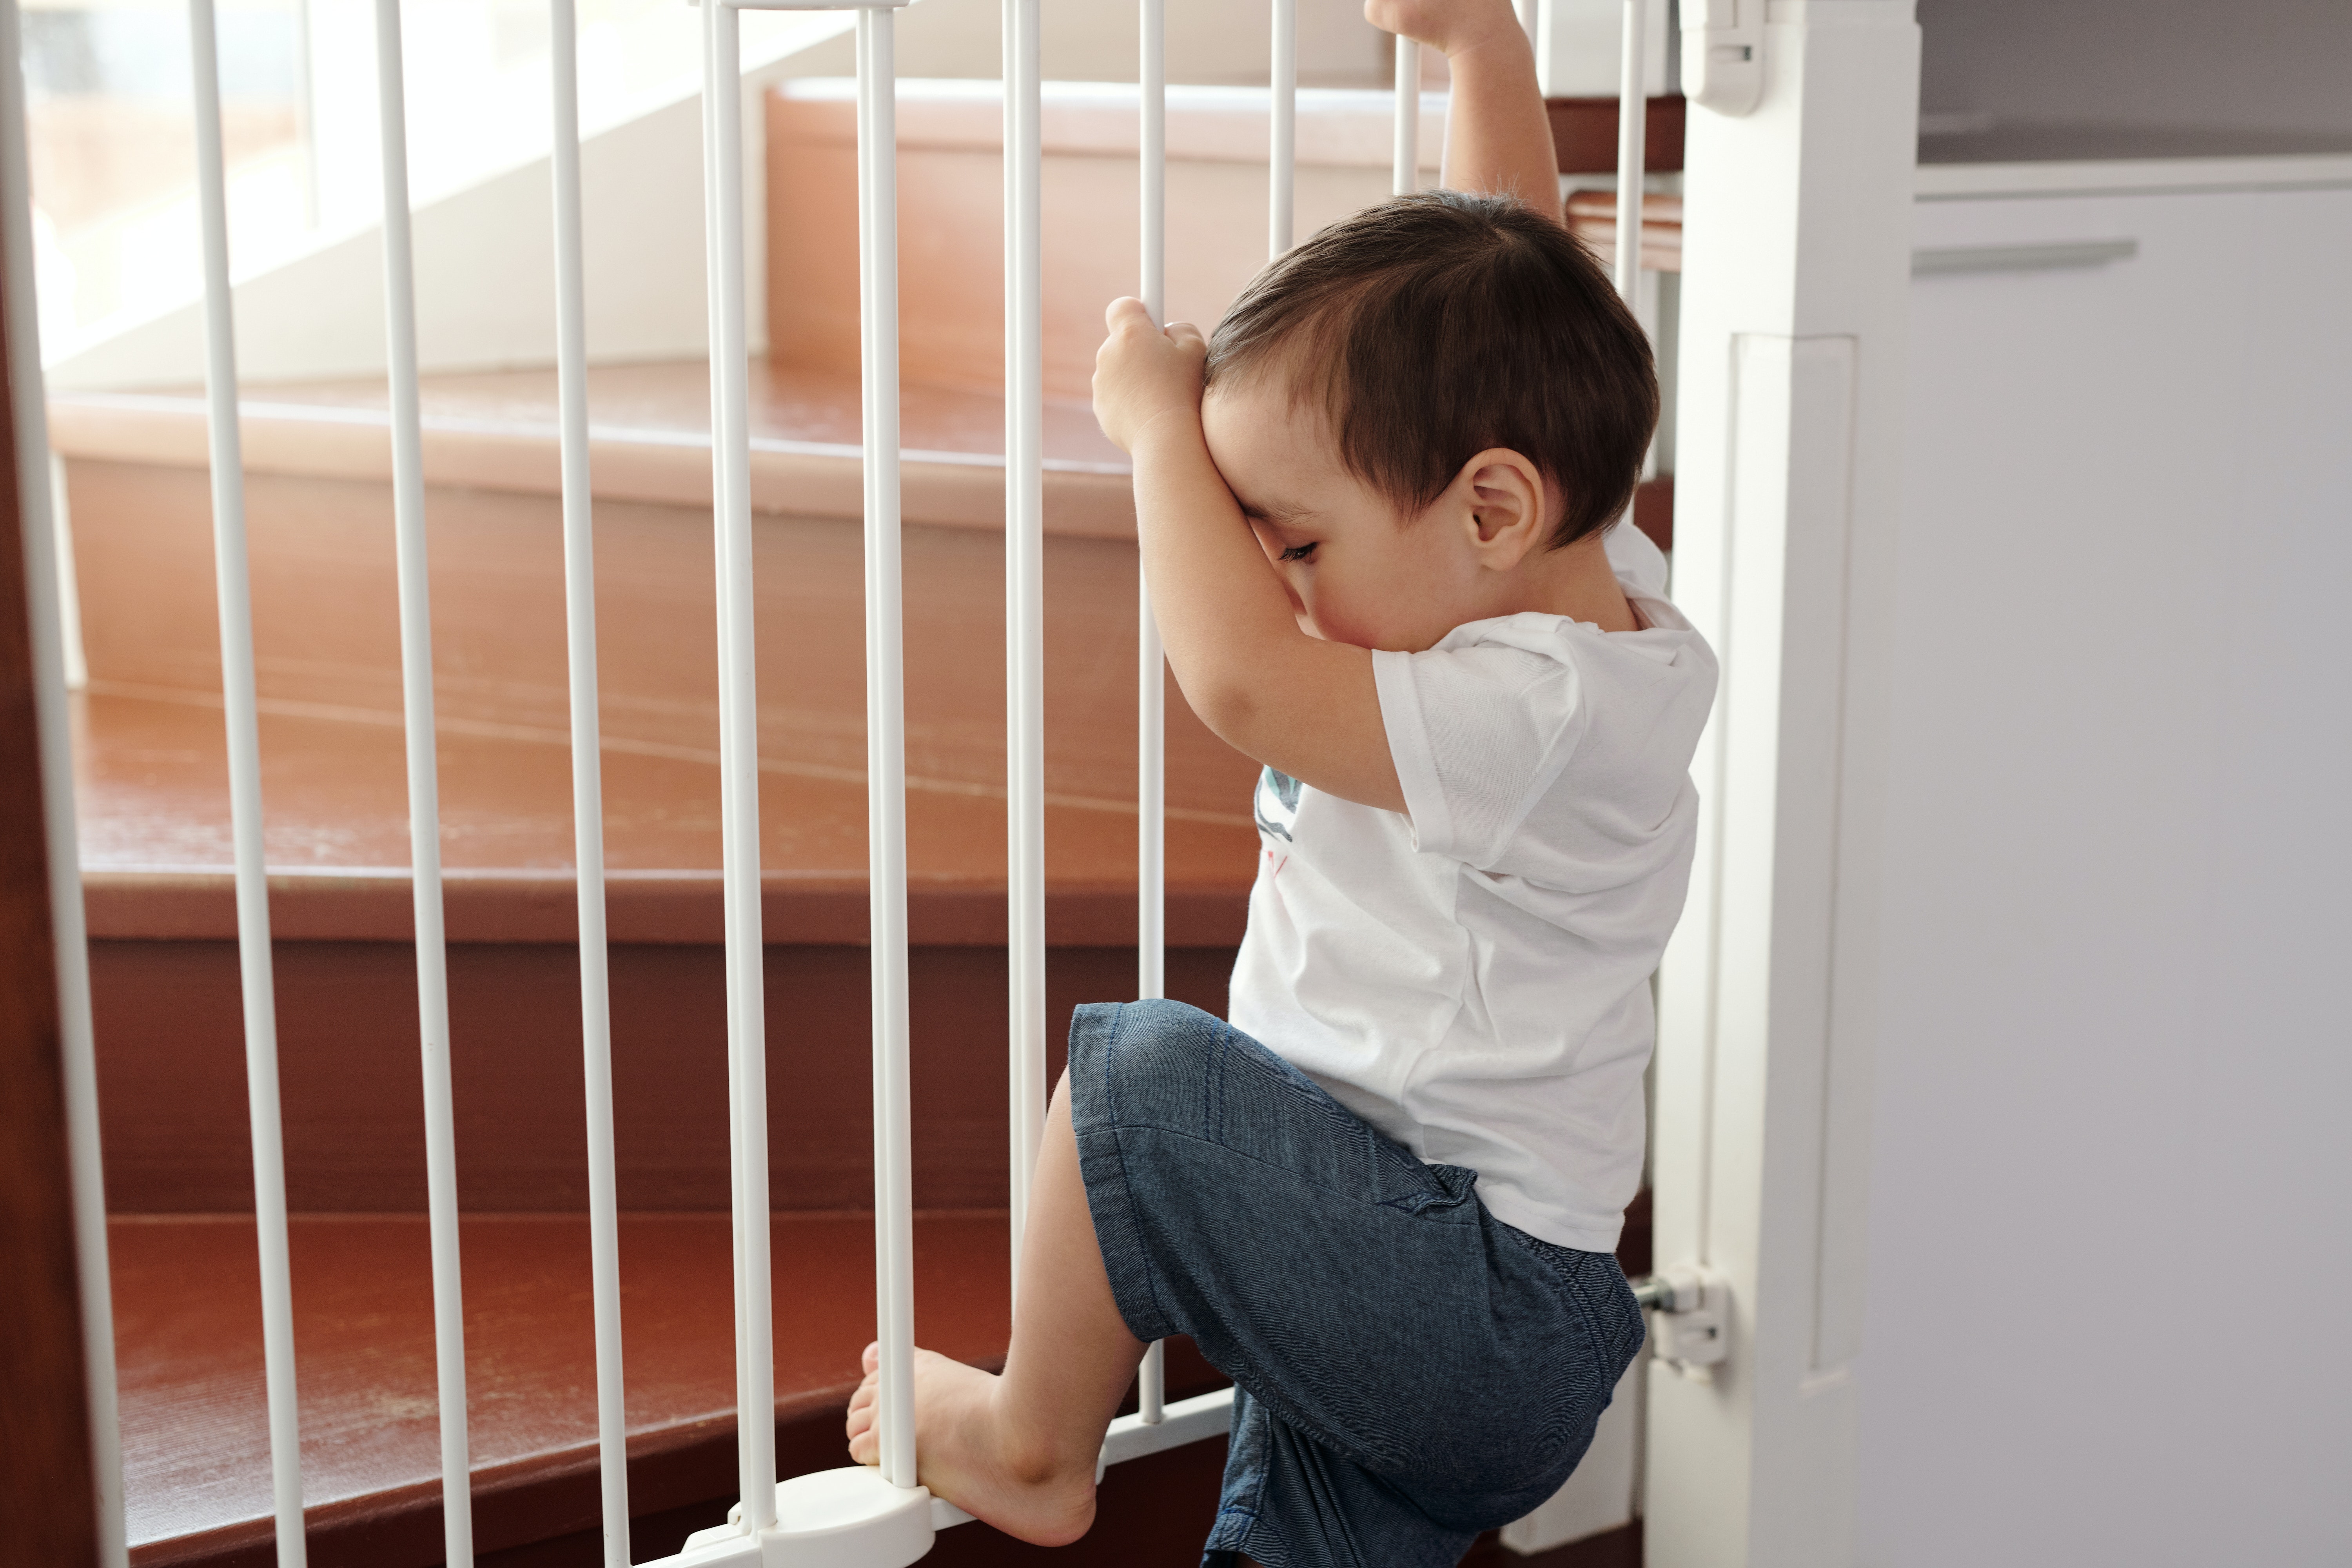 Safety Concerns to Watch Out For Now That You Have Kids